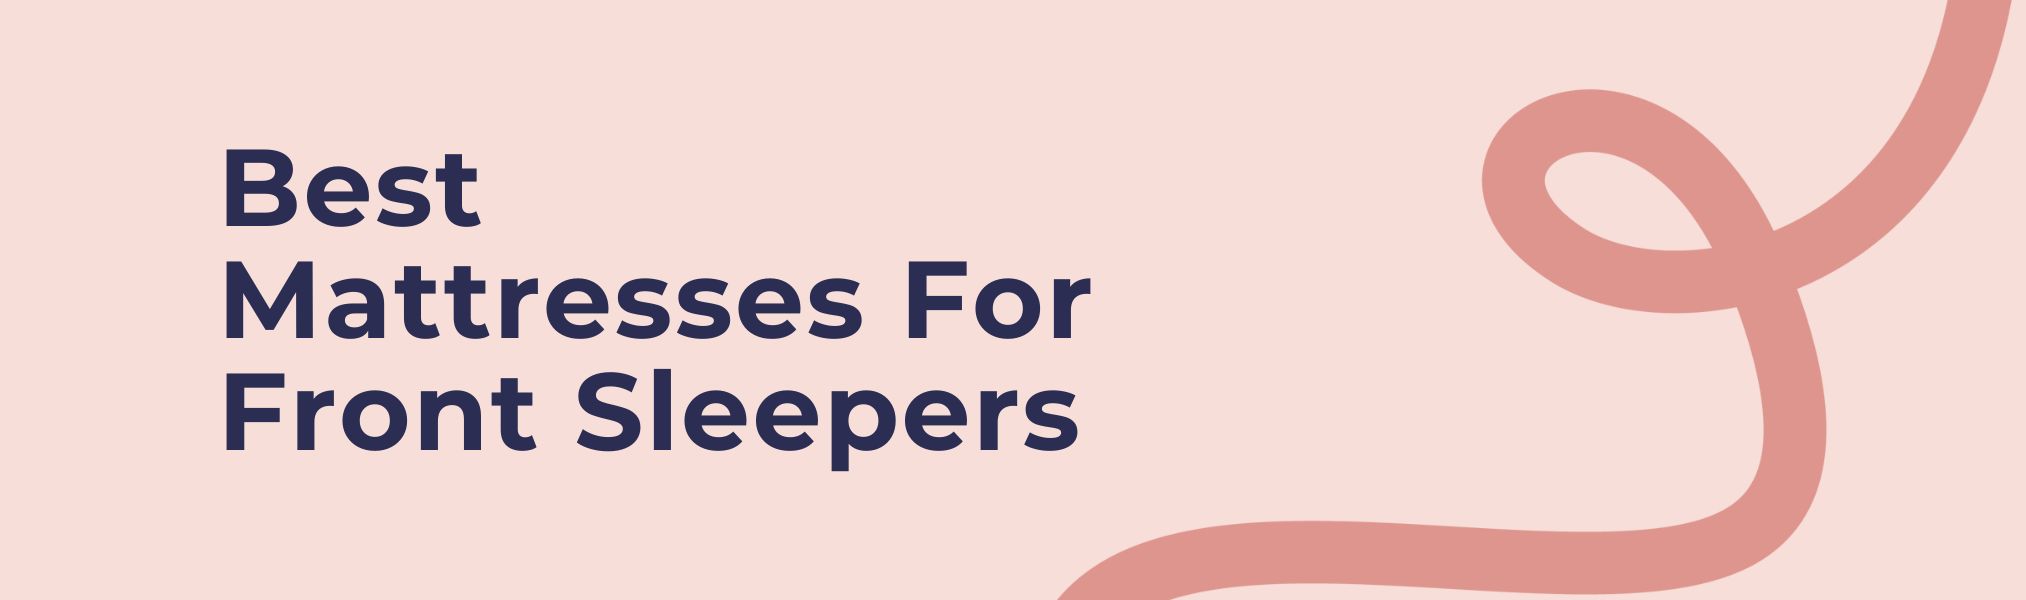 Best Mattresses for Front Sleepers